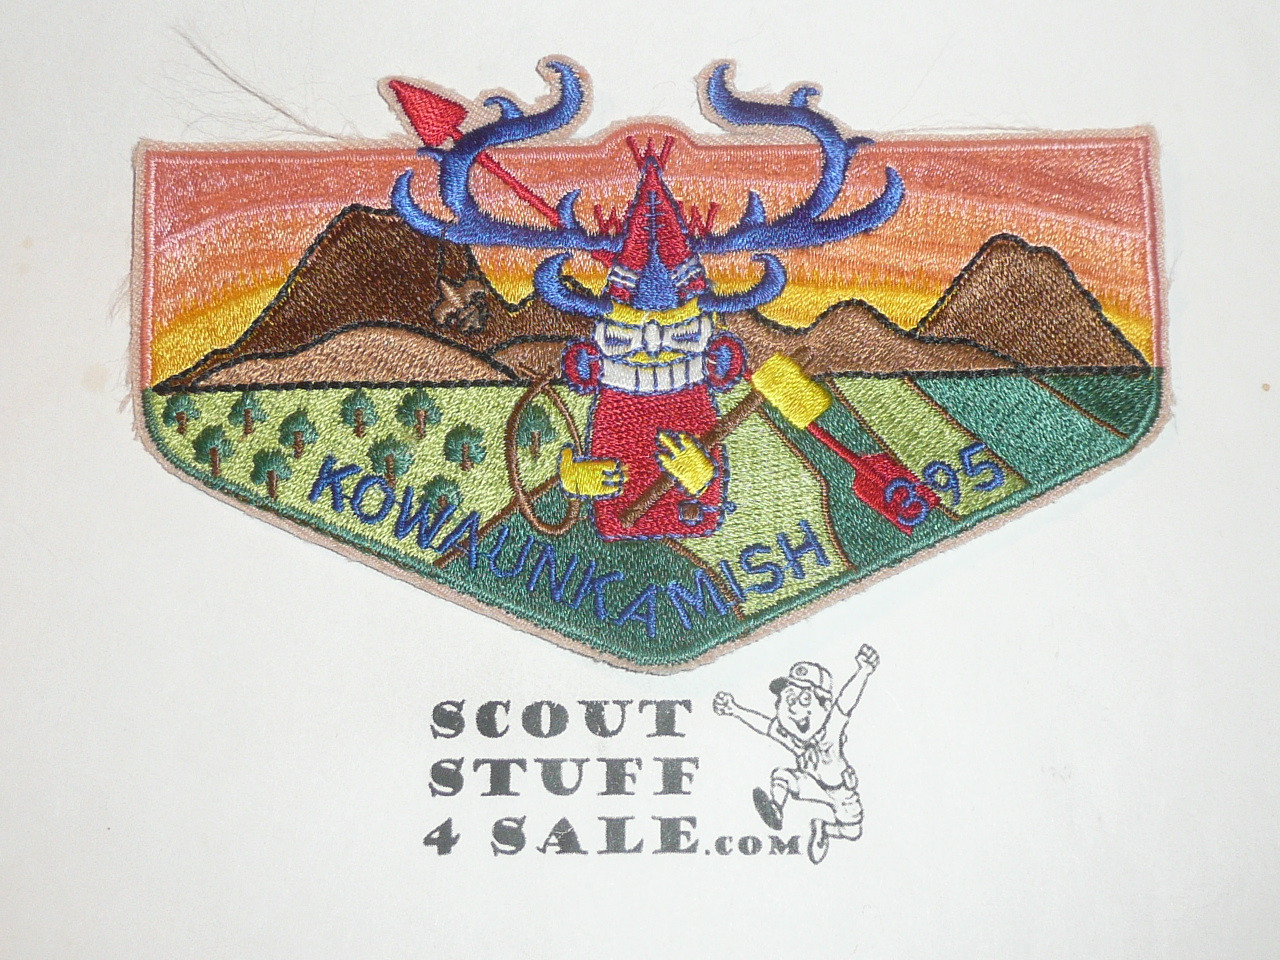 Order of the Arrow Lodge #395 Kowaunkamish s24 Flap Patch